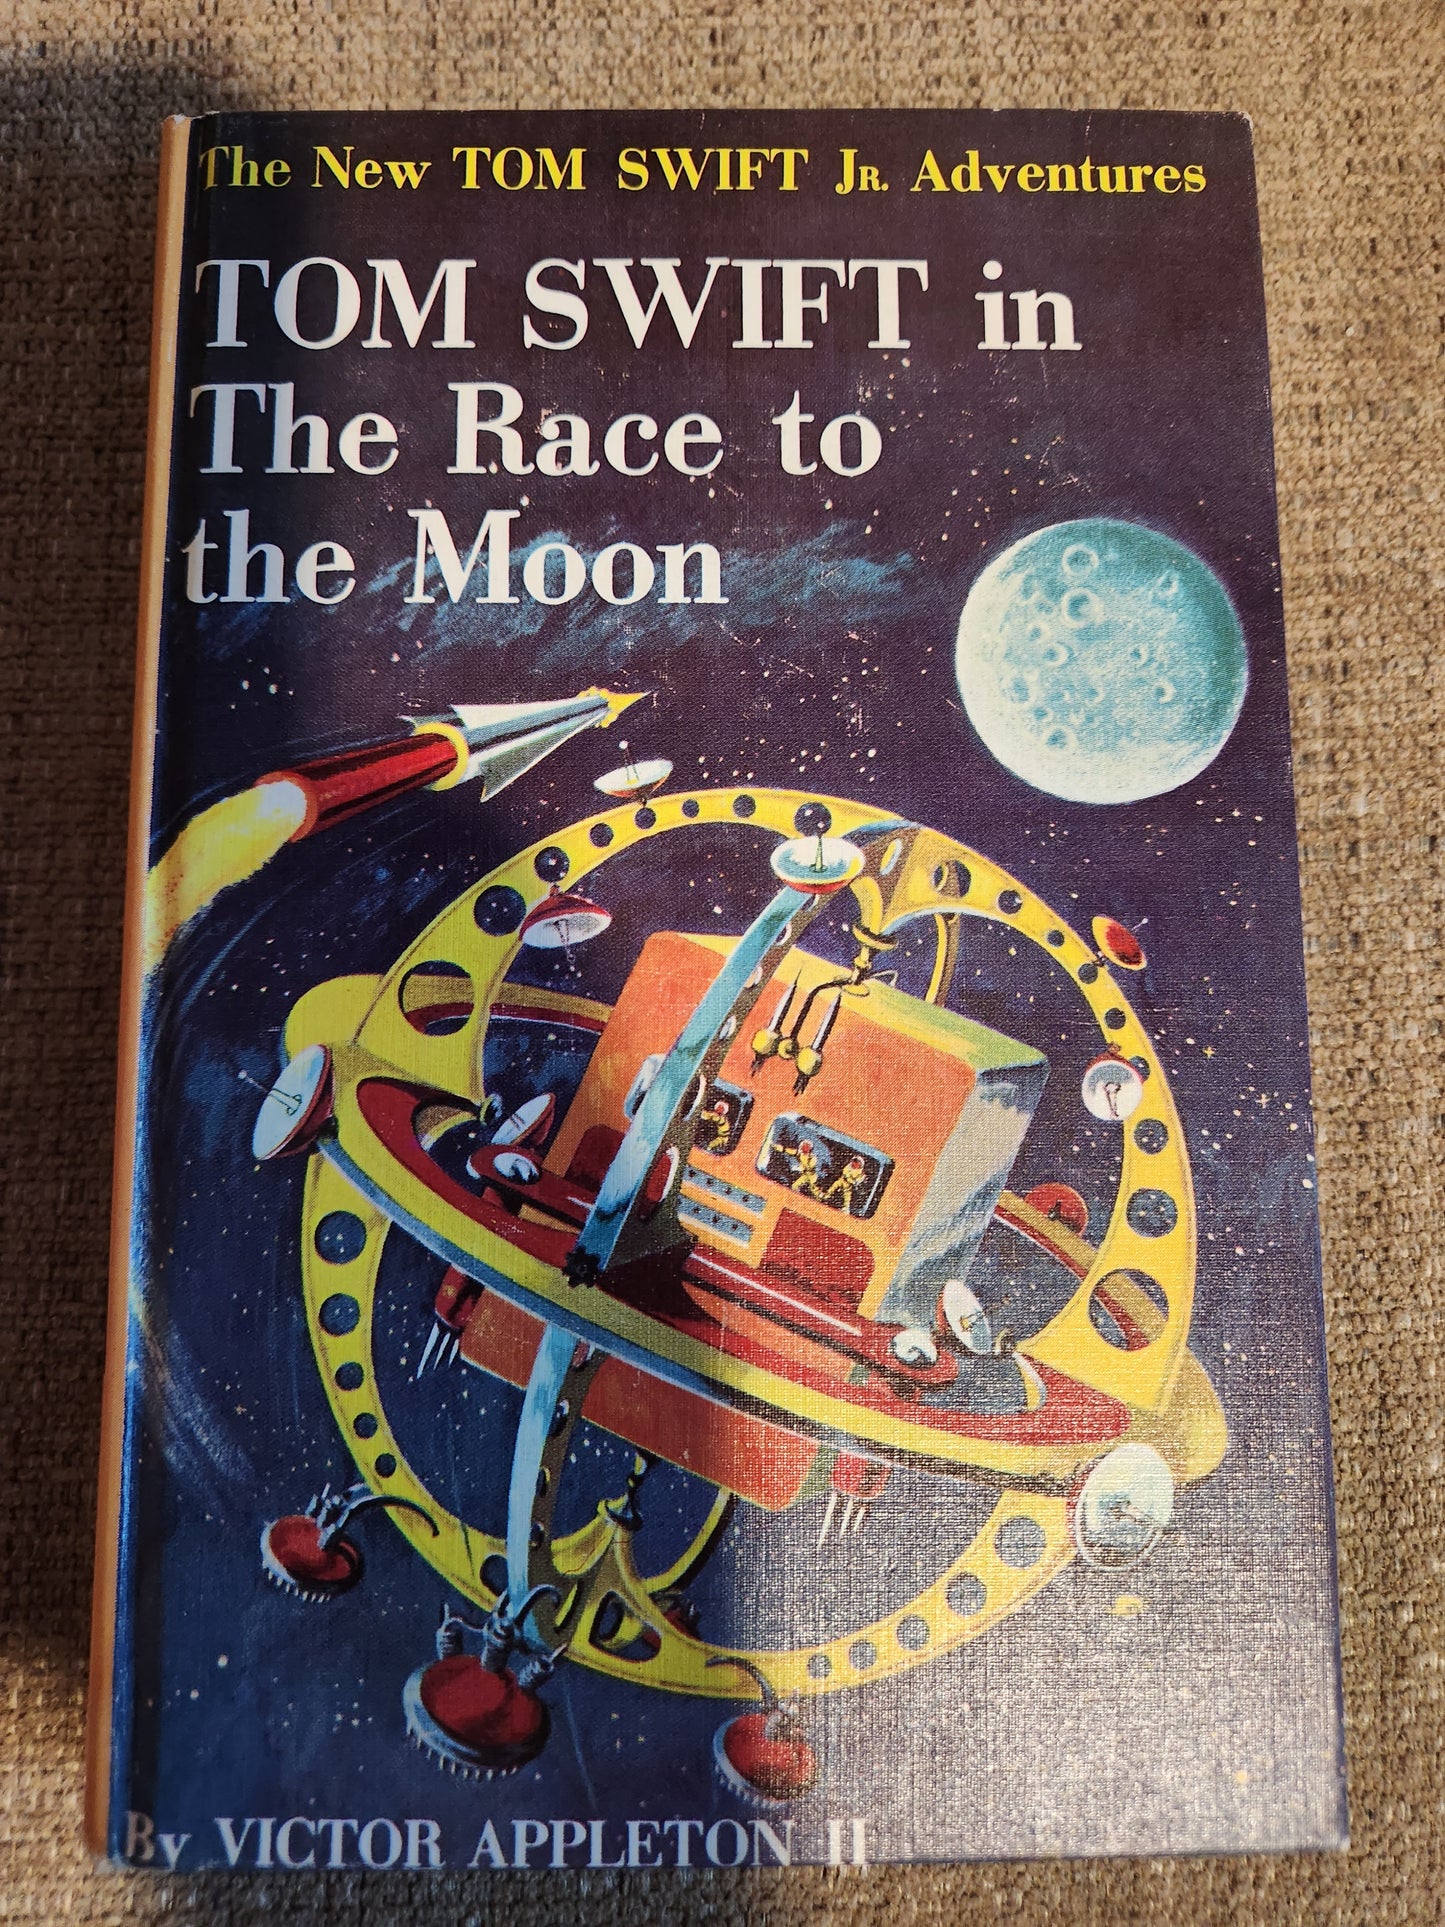 "Tom Swift in The Race to the Moon", by Victor Appleton II (Yellow Spine)